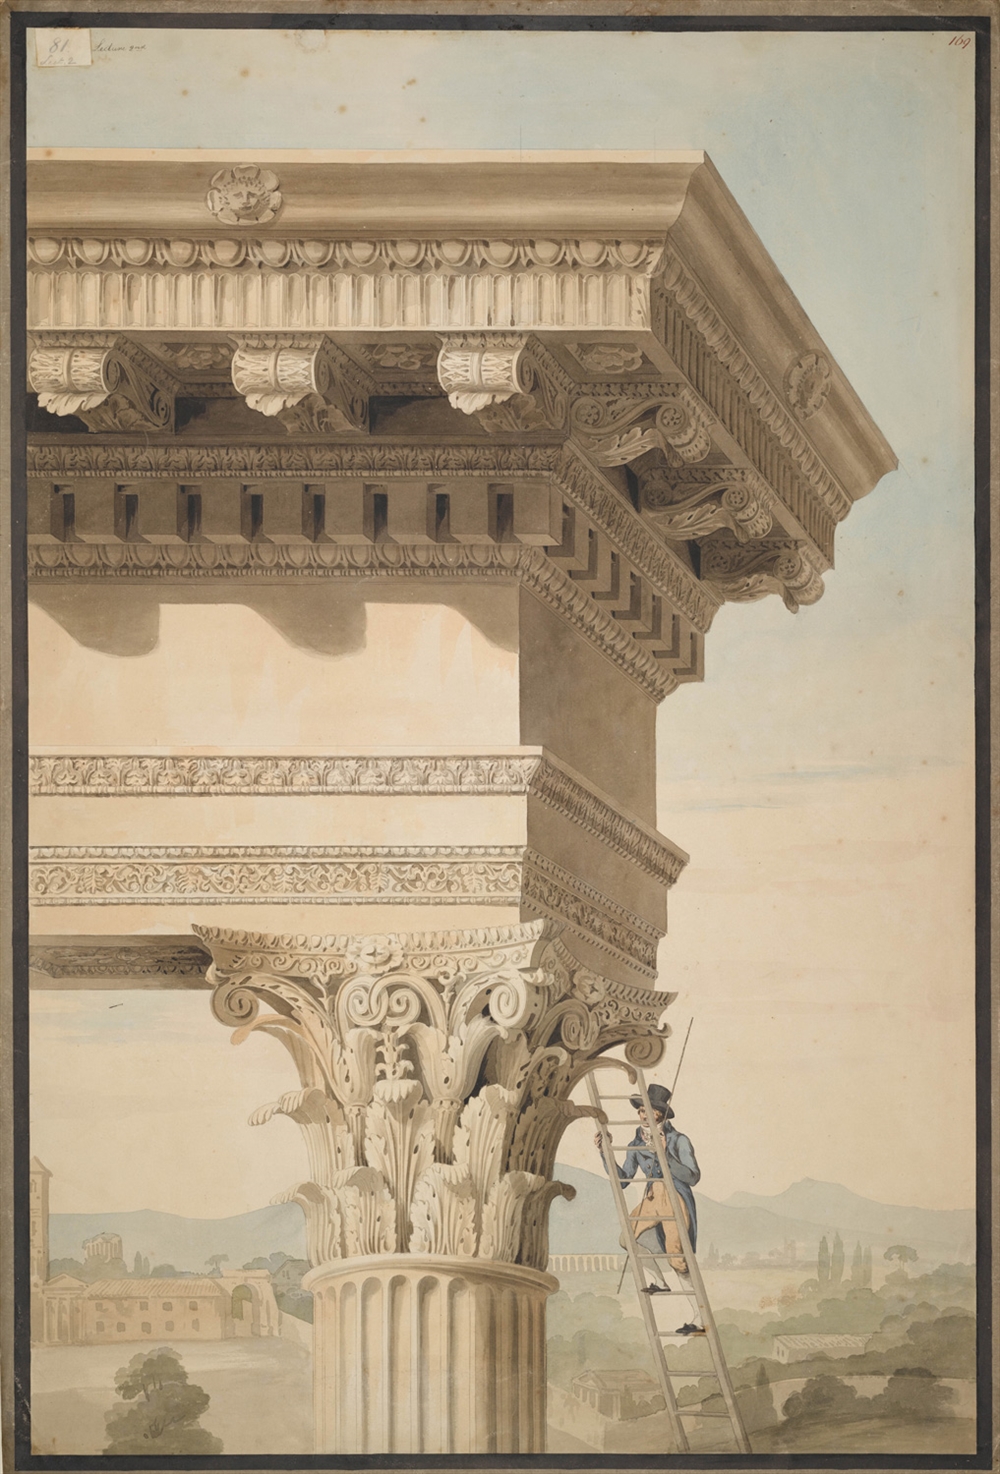 Archisearch IN PURSUIT OF ANTIQUITY: DRAWINGS BY THE GIANTS OF BRITISH NEO-CLASSICISM / TCHOBAN FOUNDATION - MUSEUM FOR ARCHITECTURAL DRAWING